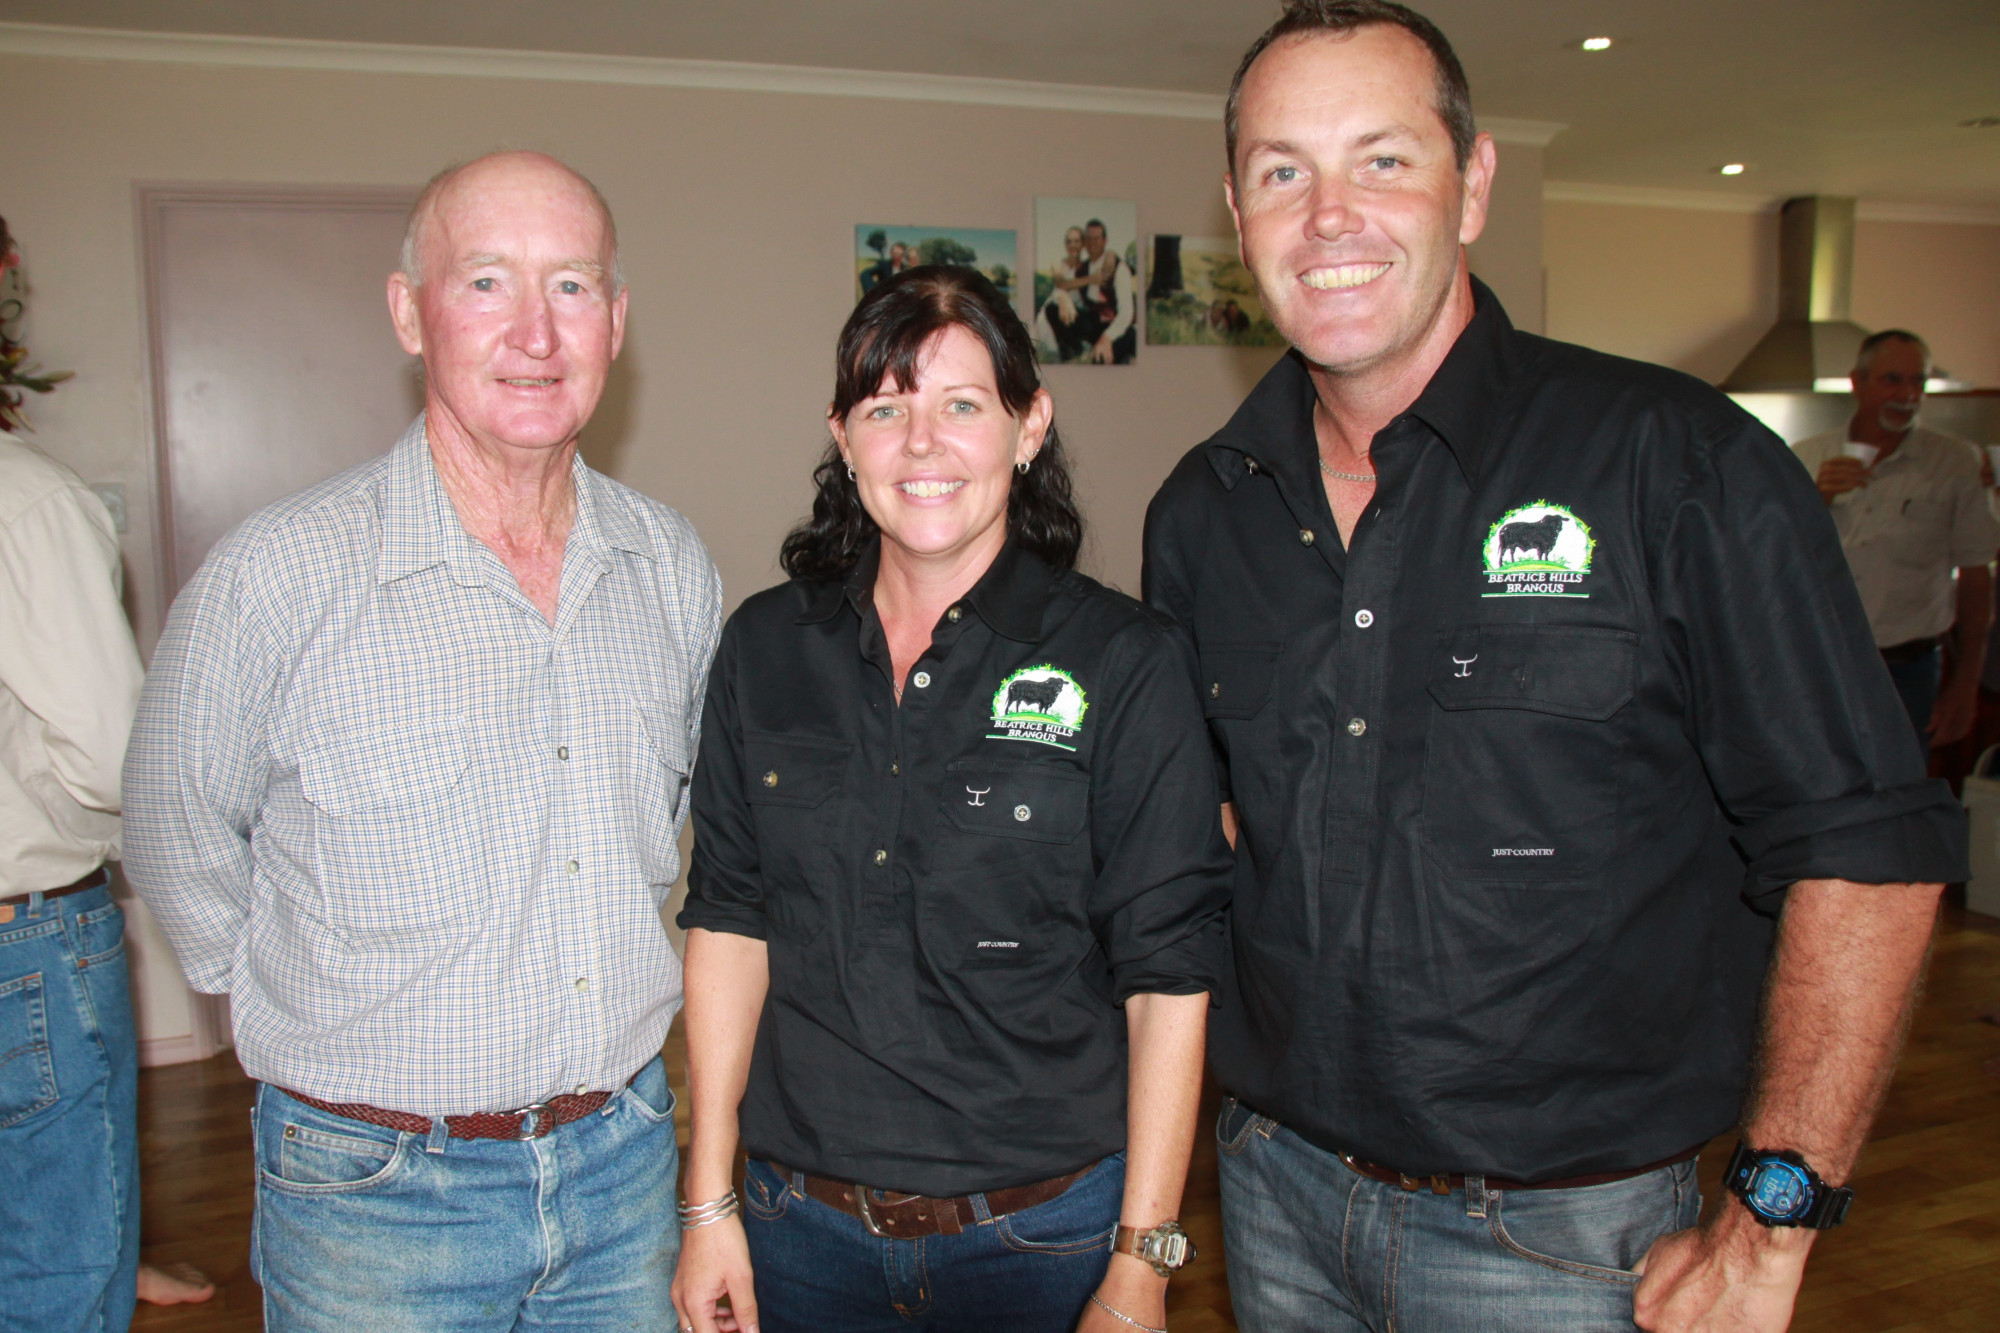 Greg Binnie of Upper Barron chats with Mandy and Liam Postle of Beatrice Hills Brangus Stud, Millaa Millaa. Mandy and Liam said they enjoyed coming to the Beefplan meetings as they learned something new each time they attended